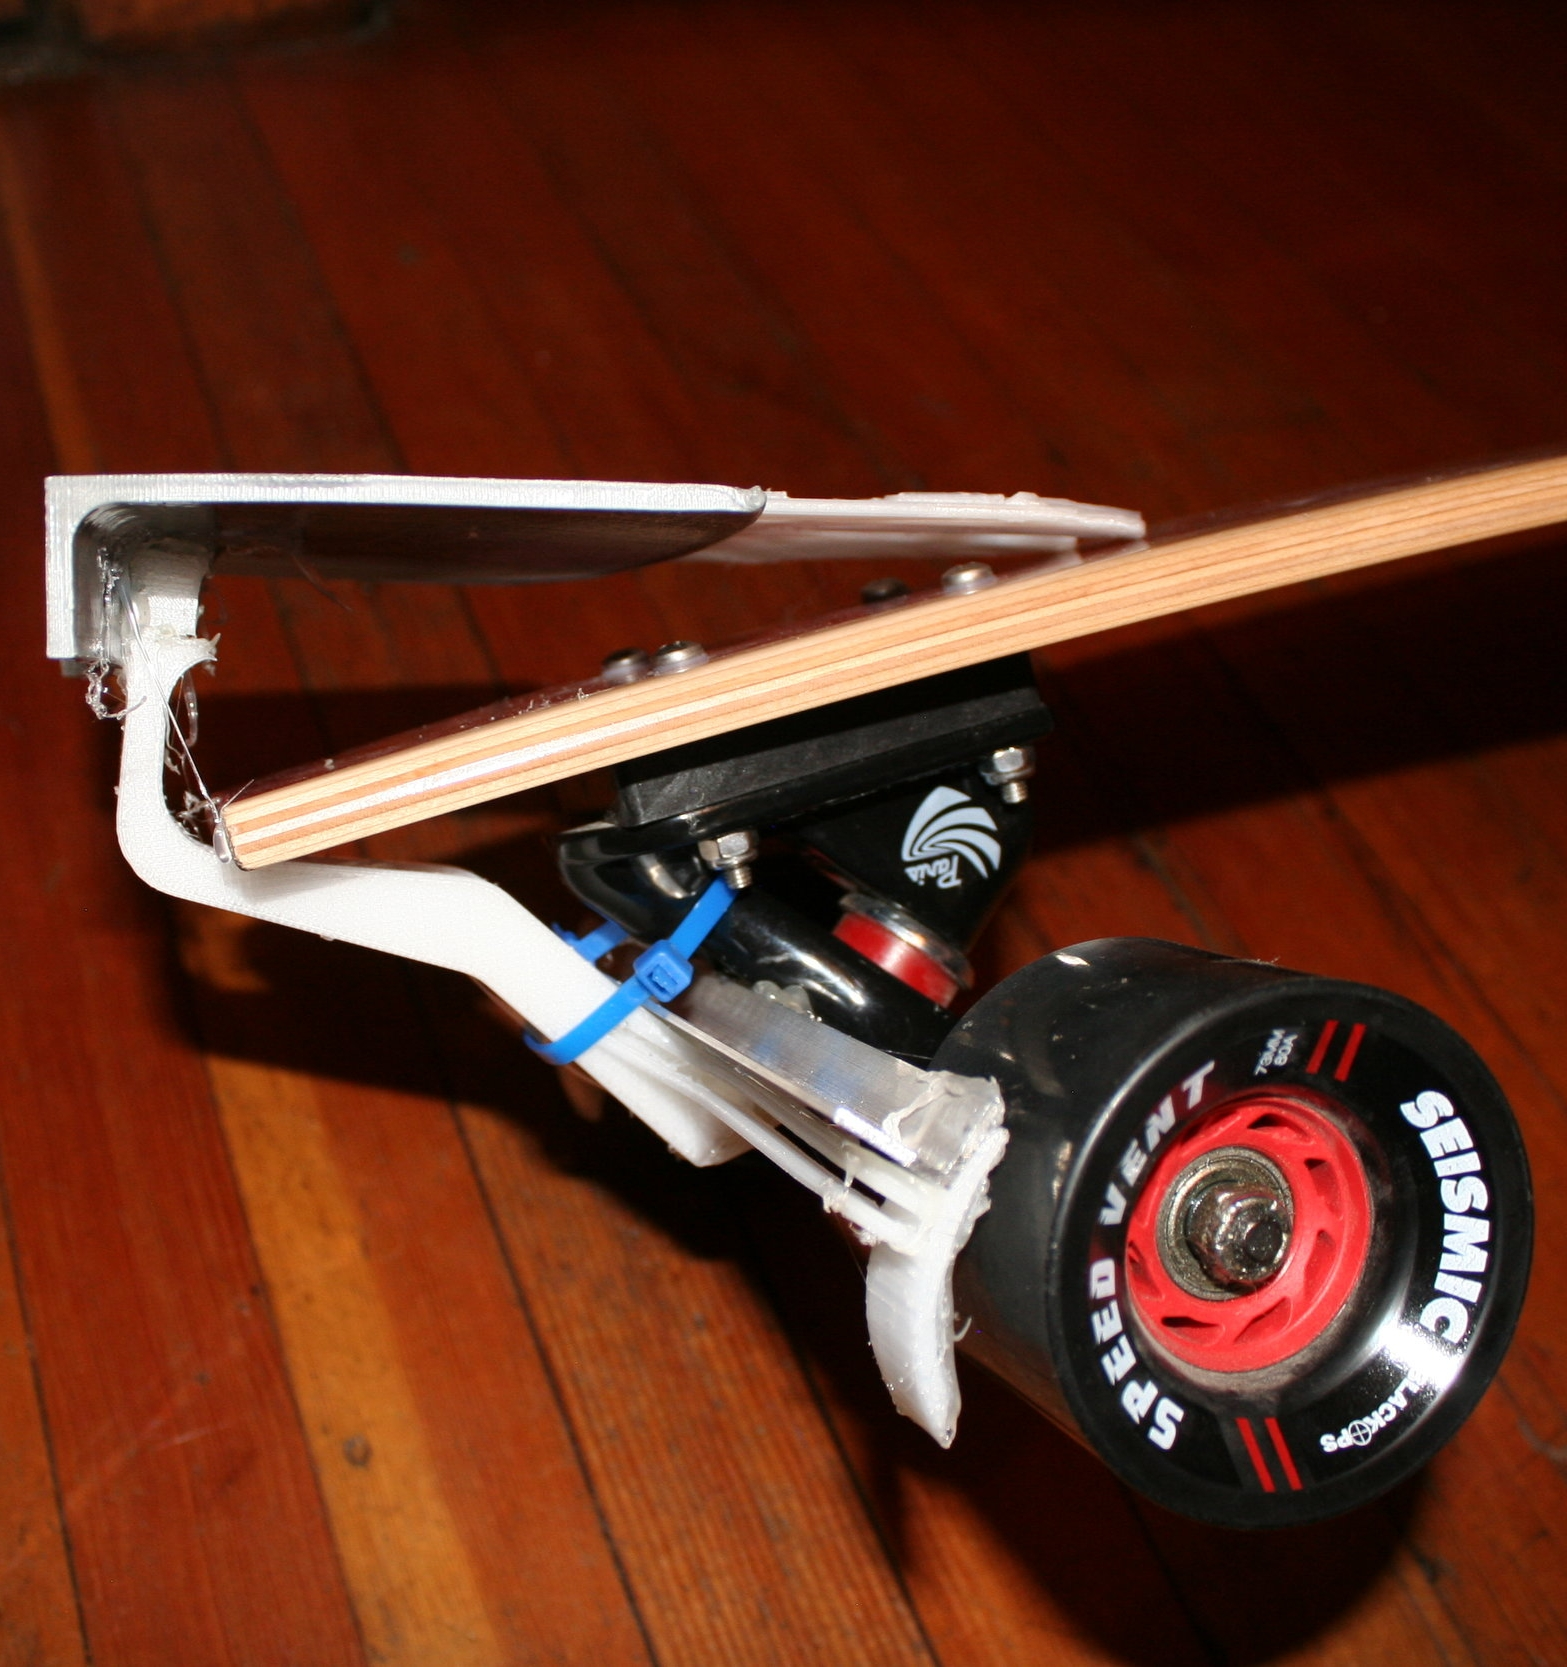  Fit Test of a Prototype Braking System 